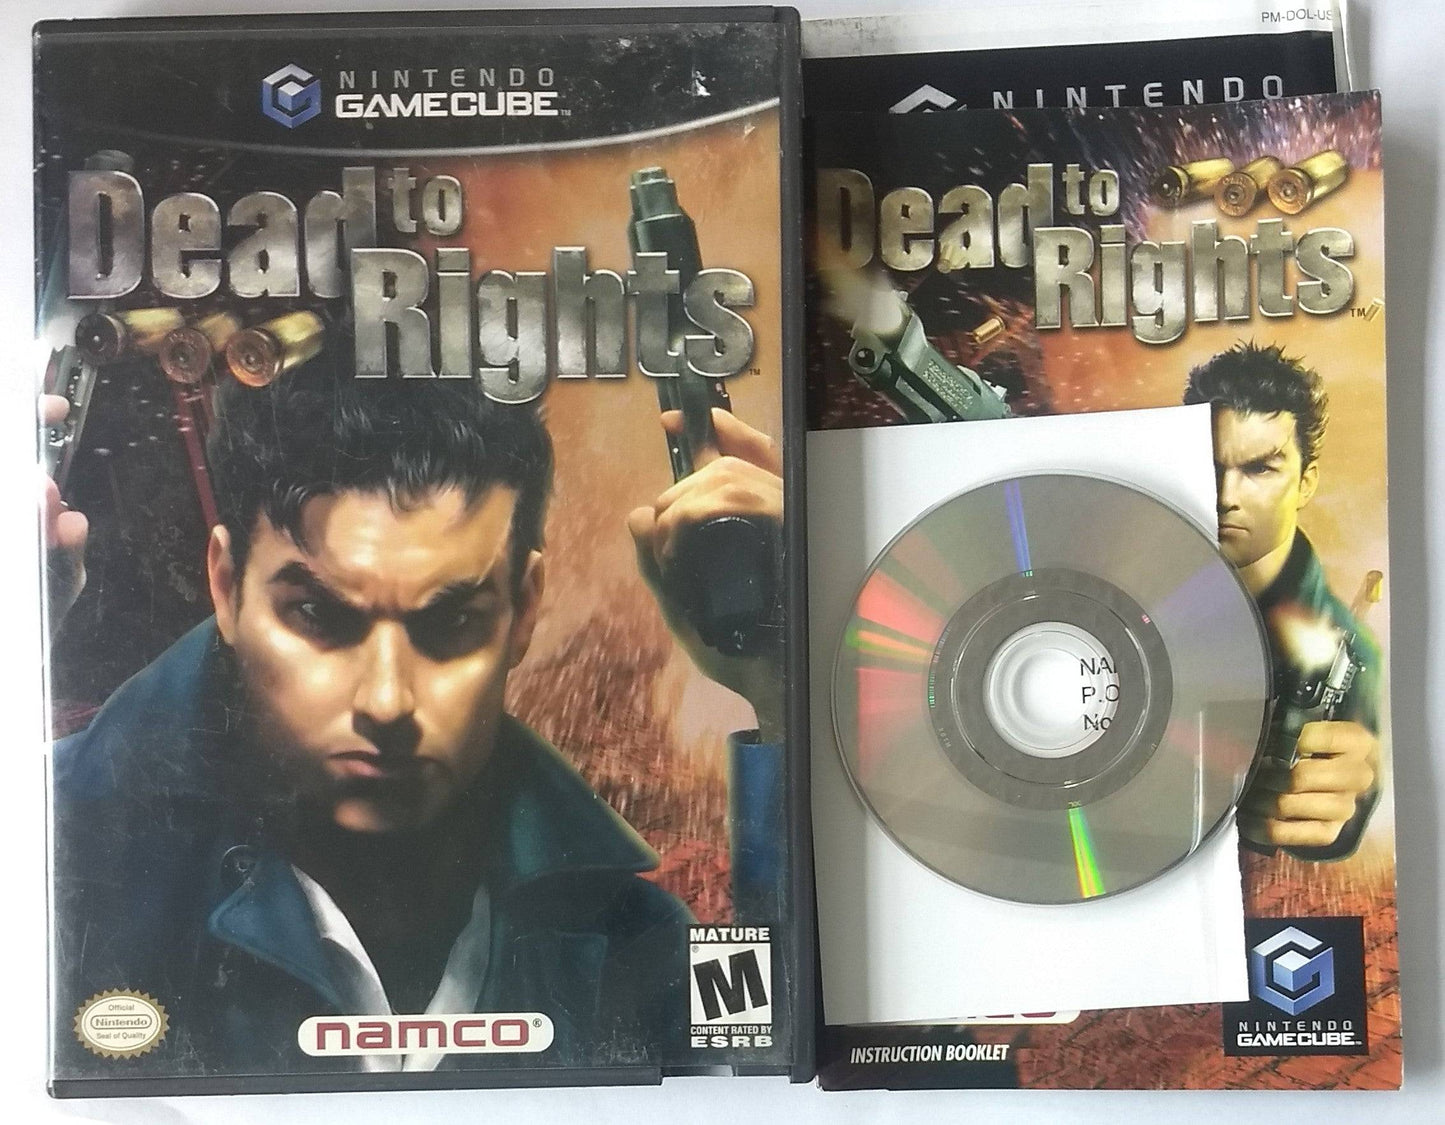 DEAD TO RIGHTS (NINTENDO GAMECUBE NGC) - jeux video game-x